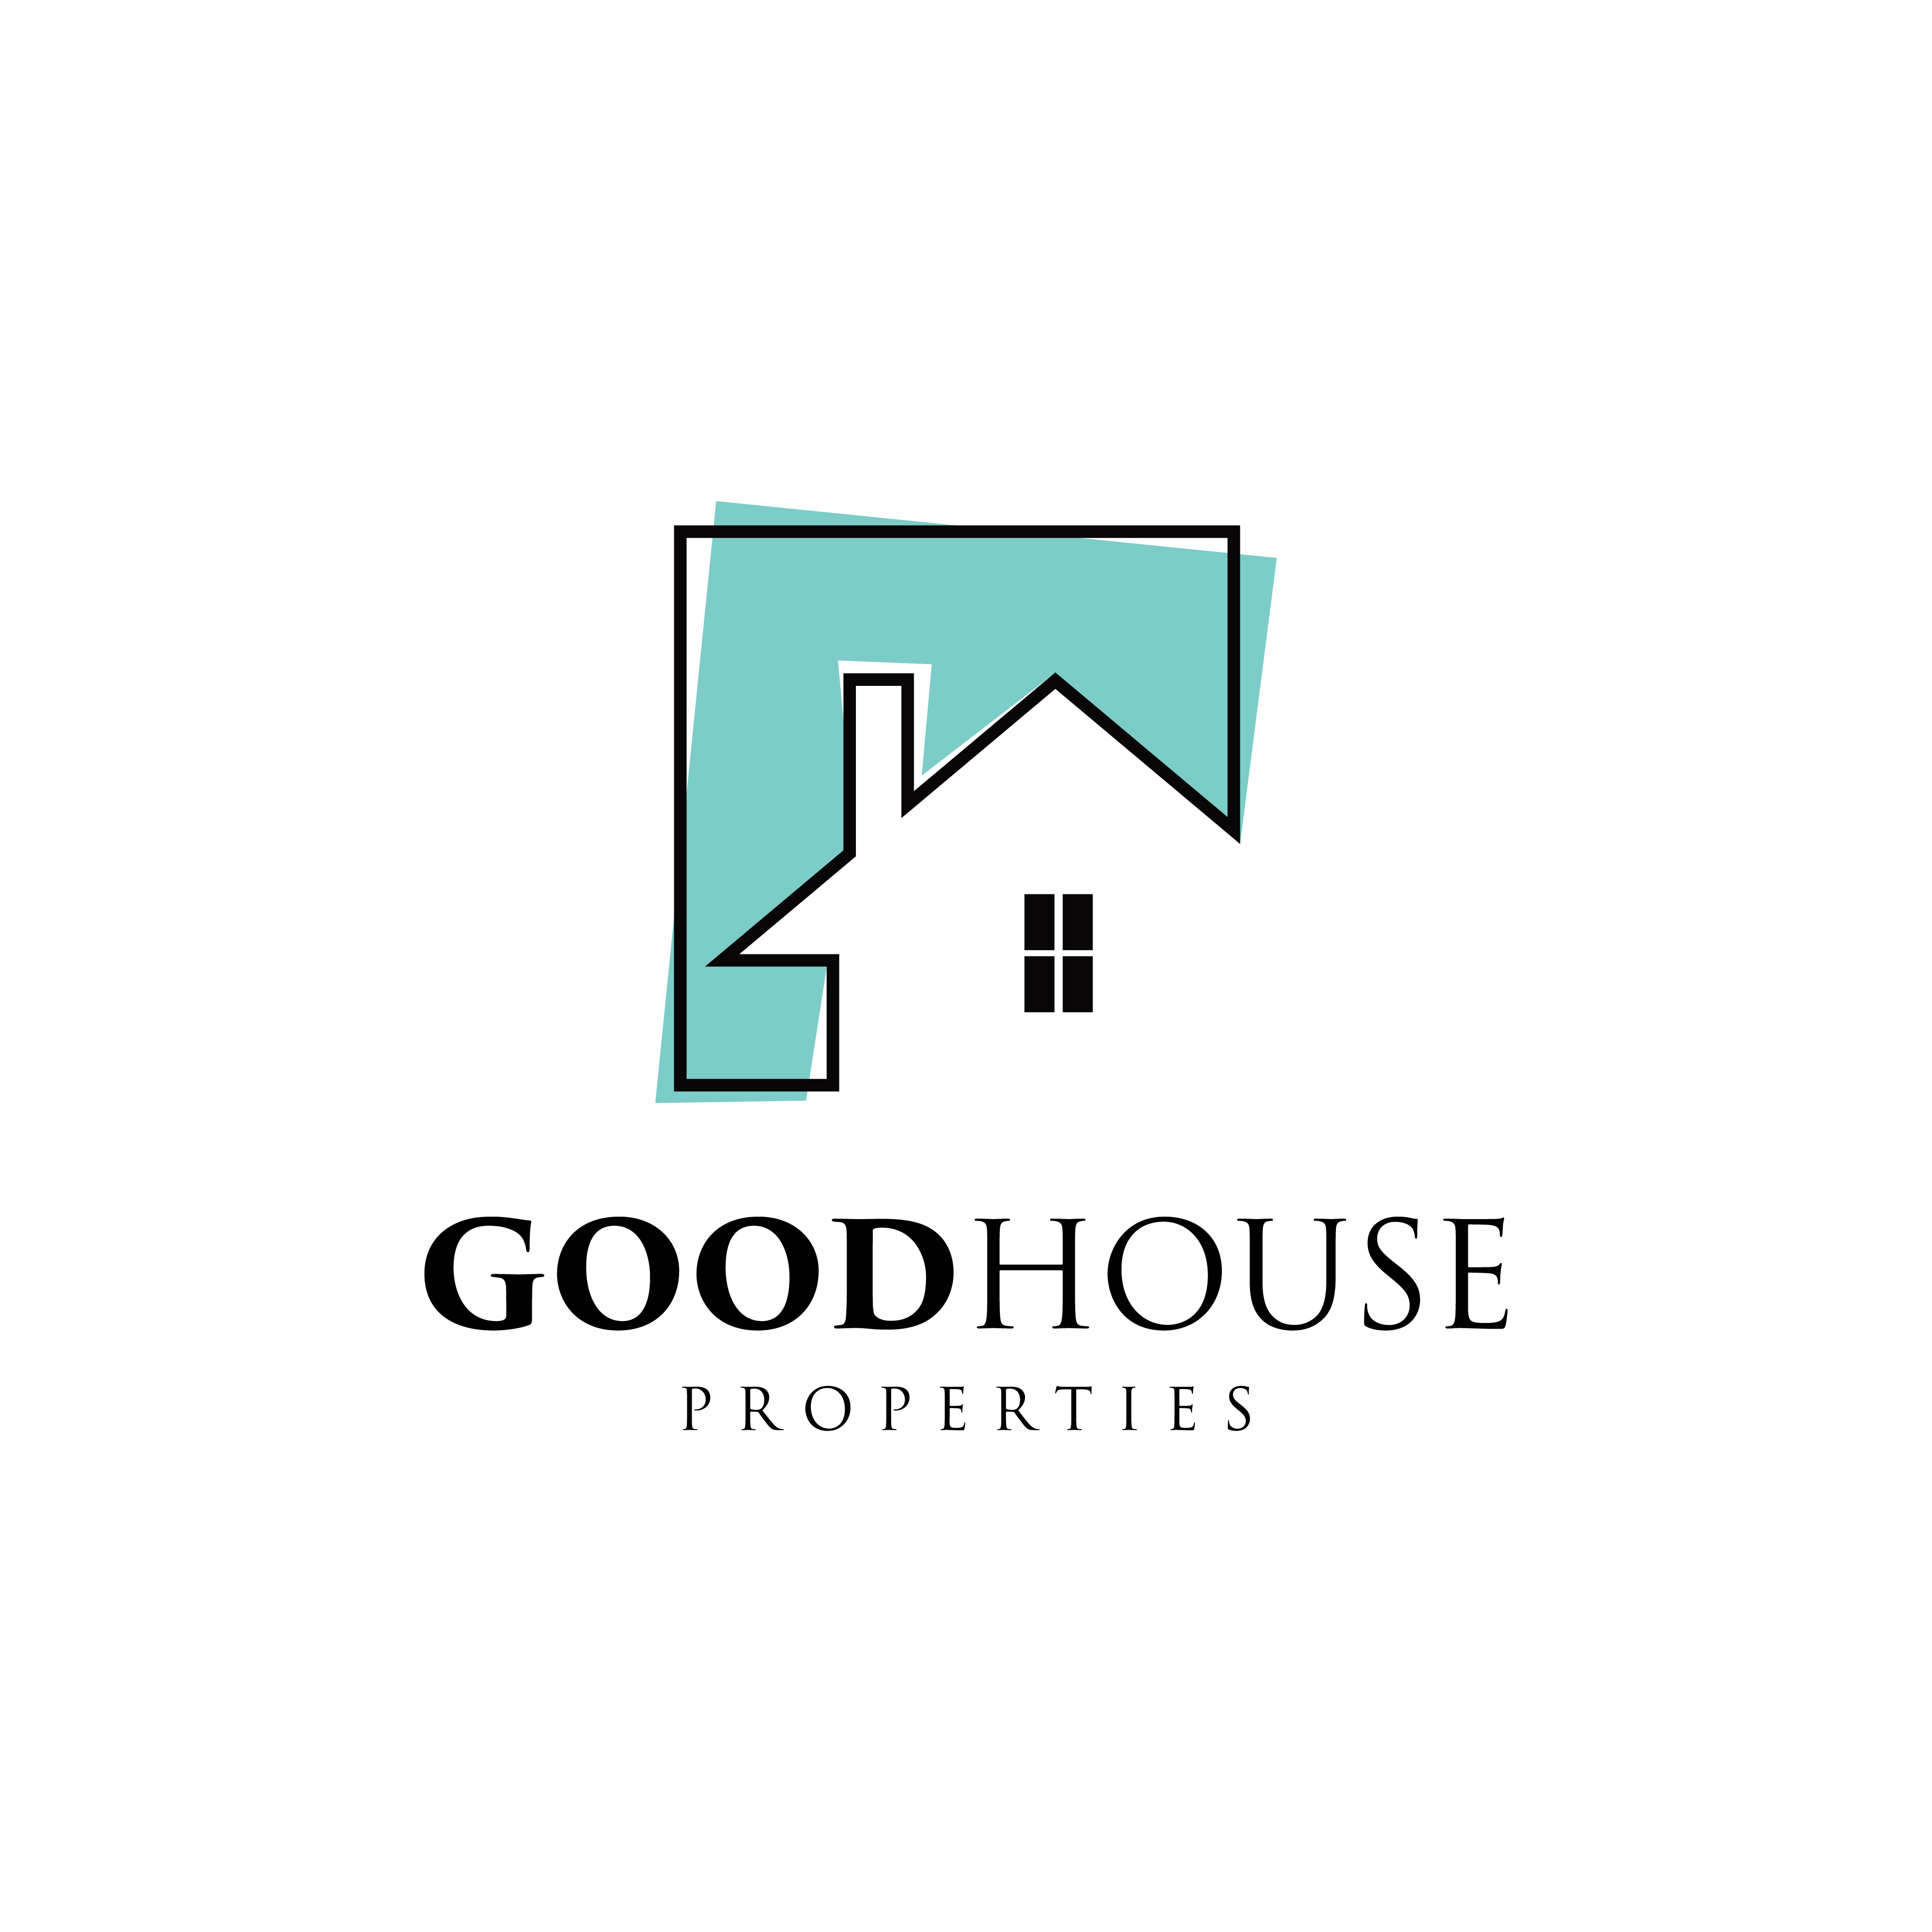 Download Simple House Property Logo 659880 - Download Free Vectors ...